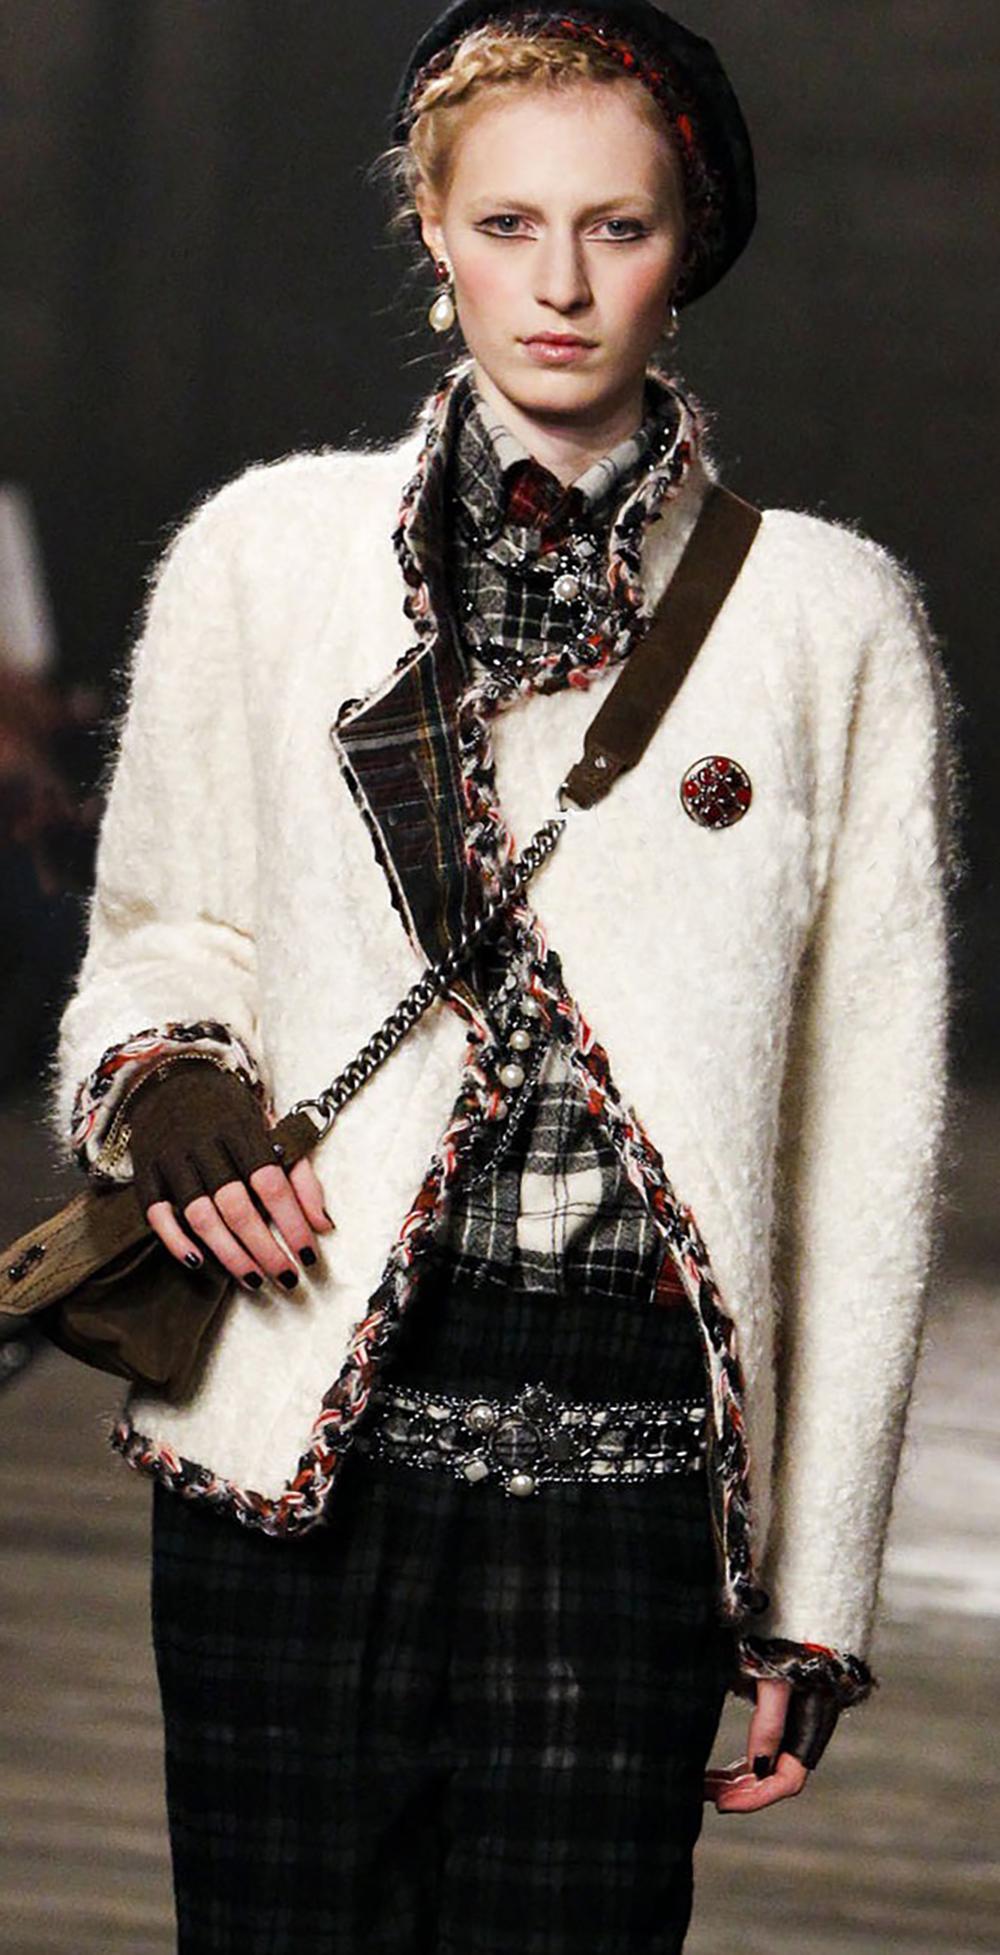 Hard to meet Chanel white faux fur jacket from Catwalk of Paris / EDINBURGH Collection, 2013 Pre-Fall Metiers d'Art
Retail price over 9,000$. Size mark 34 FR. Condition is pristine.
- CC logo jewel Gripoix button
- signature contrast braided tartan